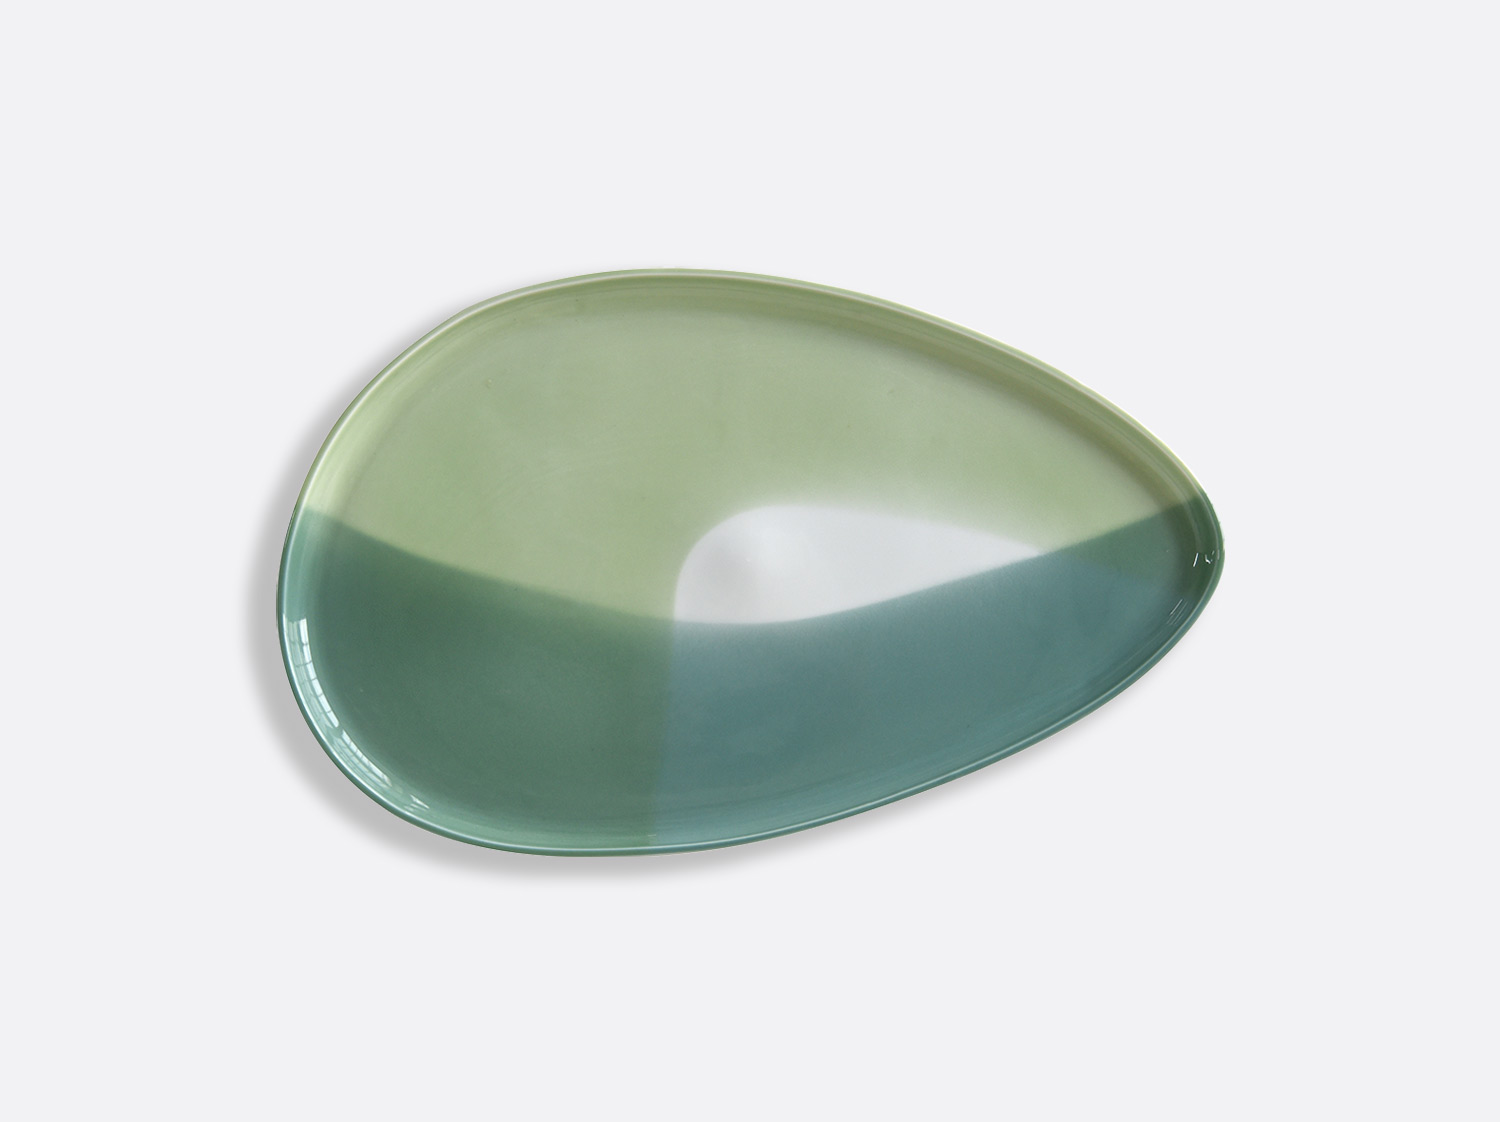 China Platter S2 blue and green of the collection Ombres - Sarah-Linda Forrer | Bernardaud